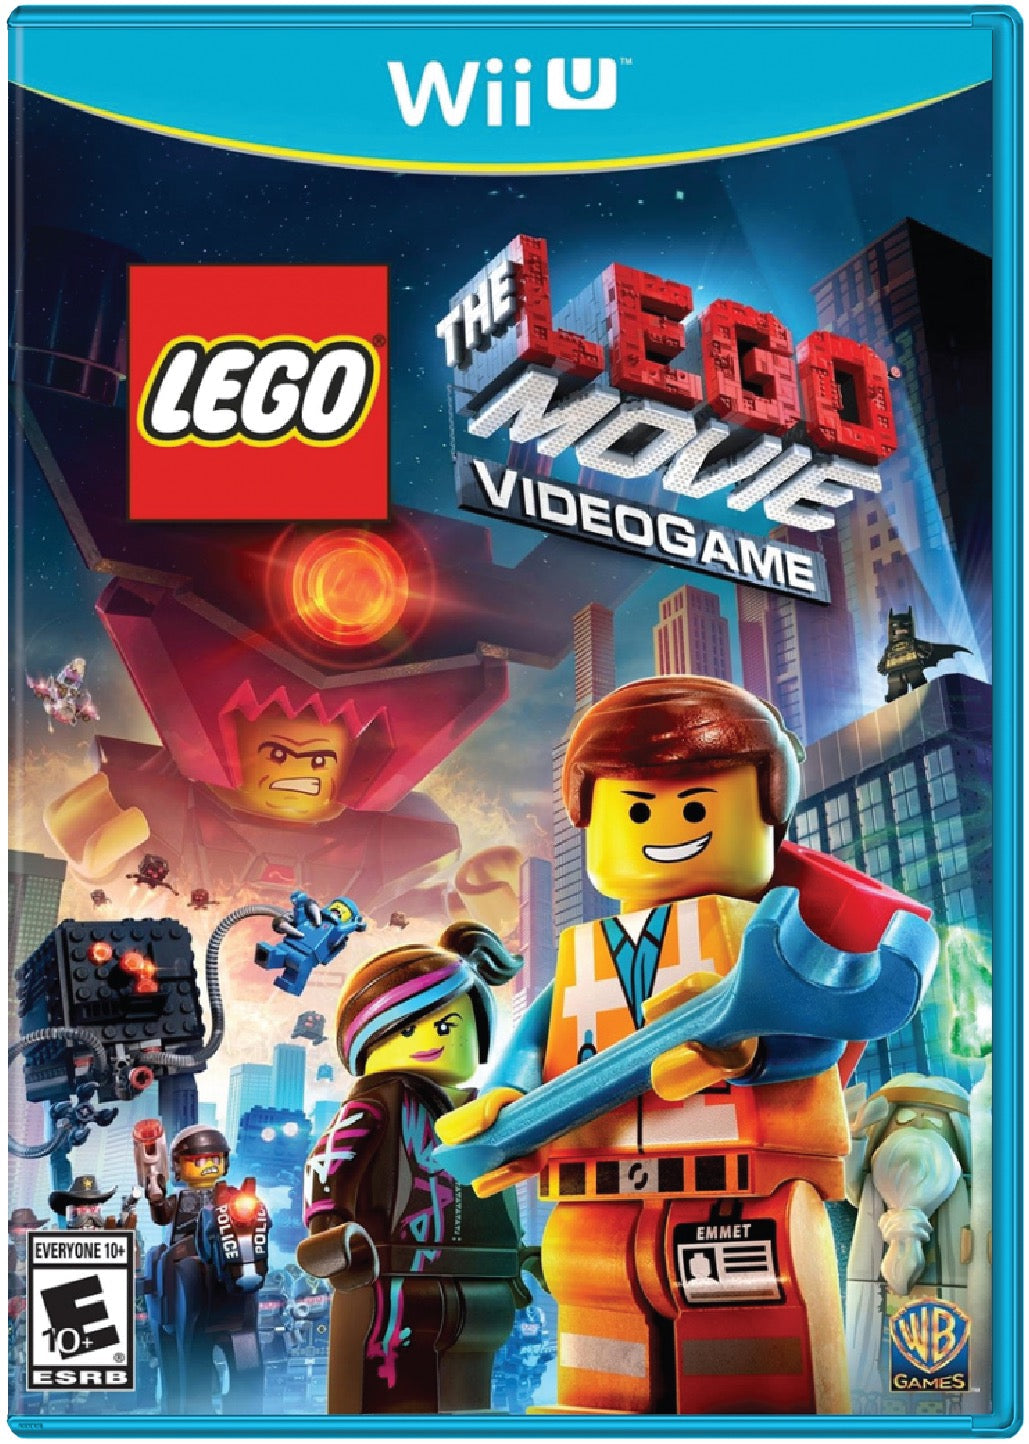 LEGO Movie Videogame Cover Art and Product Photo